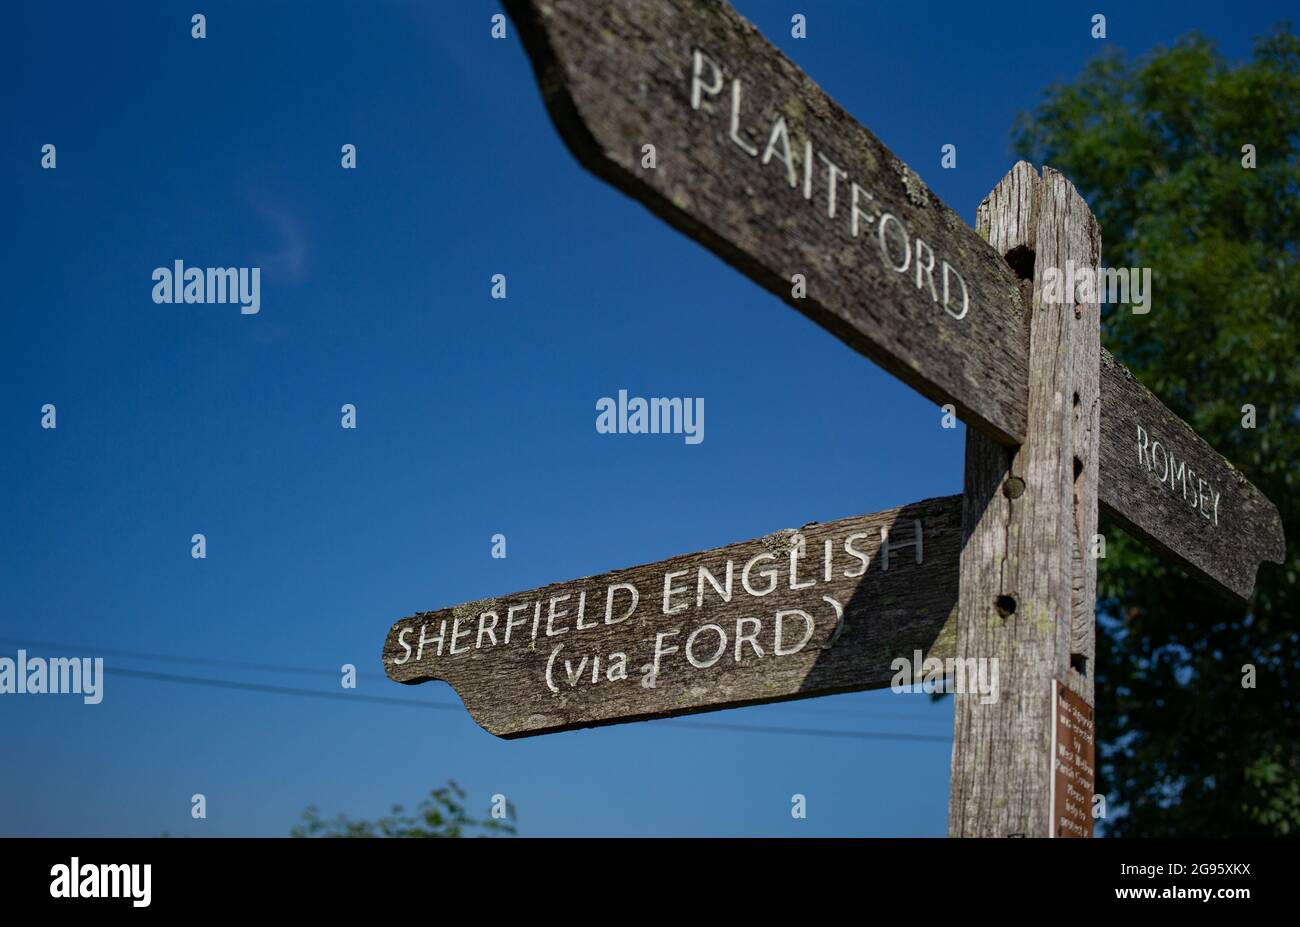 A countryside wooden road traffic sign showing directions on a junction to Sherfield English, Plaitford and Romsey in the county of Hampshire in UK. Stock Photo